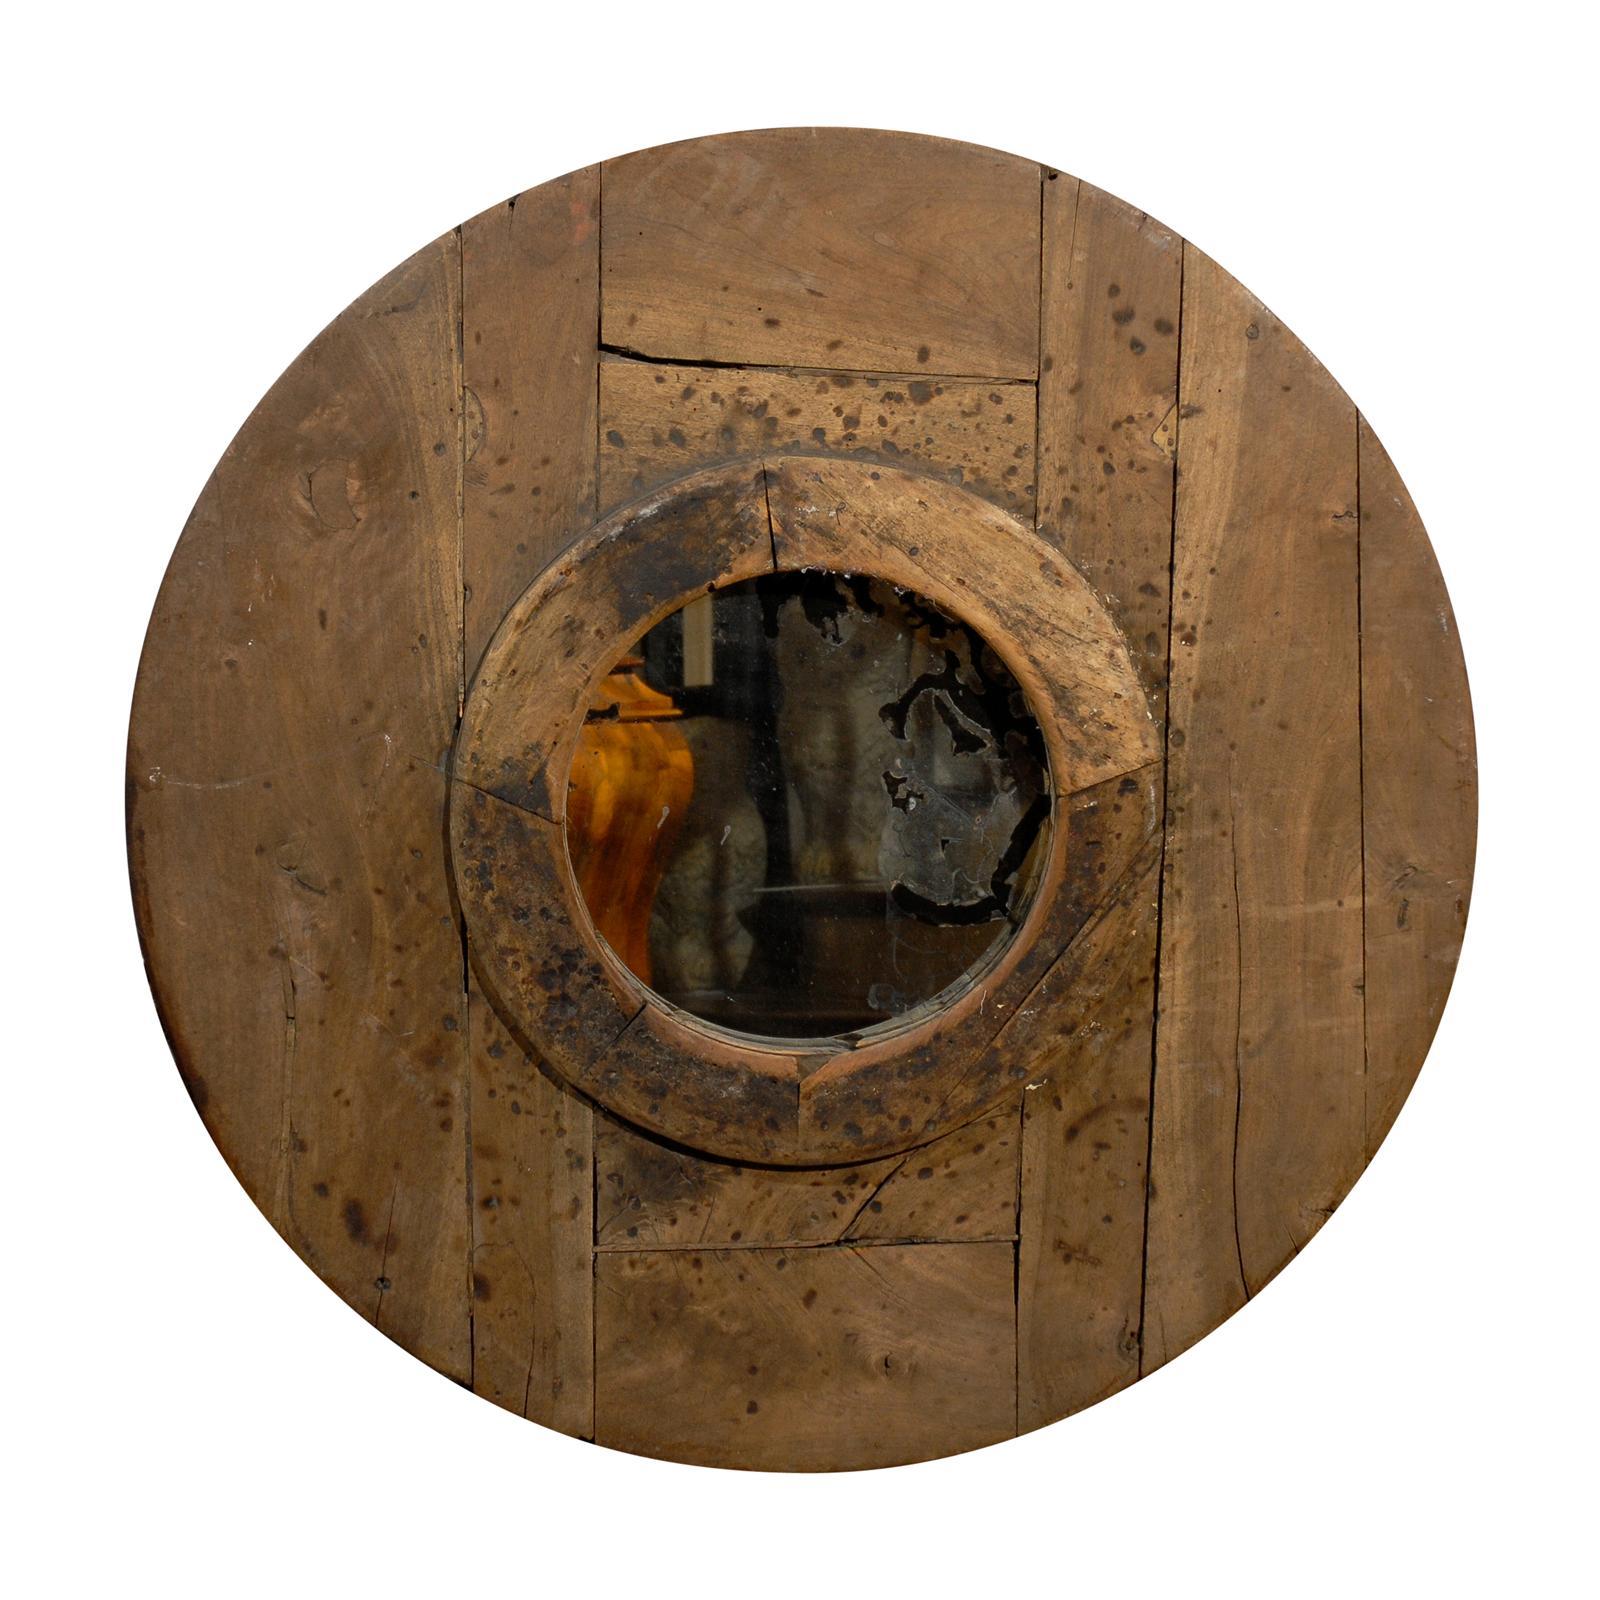 Italian Rustic Reclaimed Wood Planked Round Mirror from the Early 19th Century